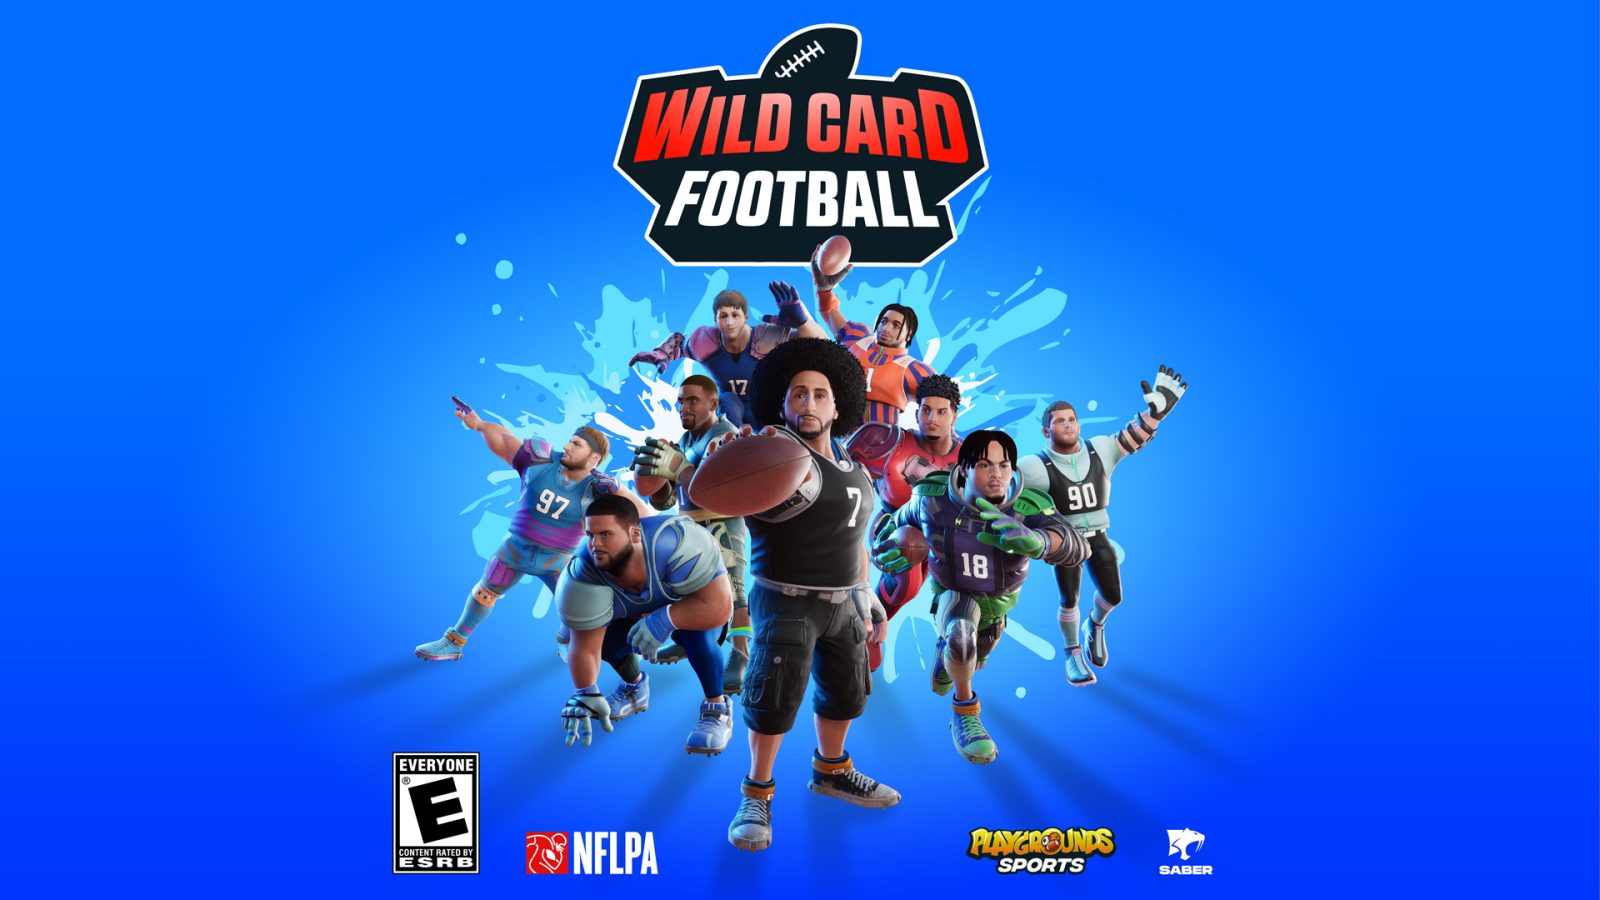 Wild Card Football by Saber Interactive (Press Release)